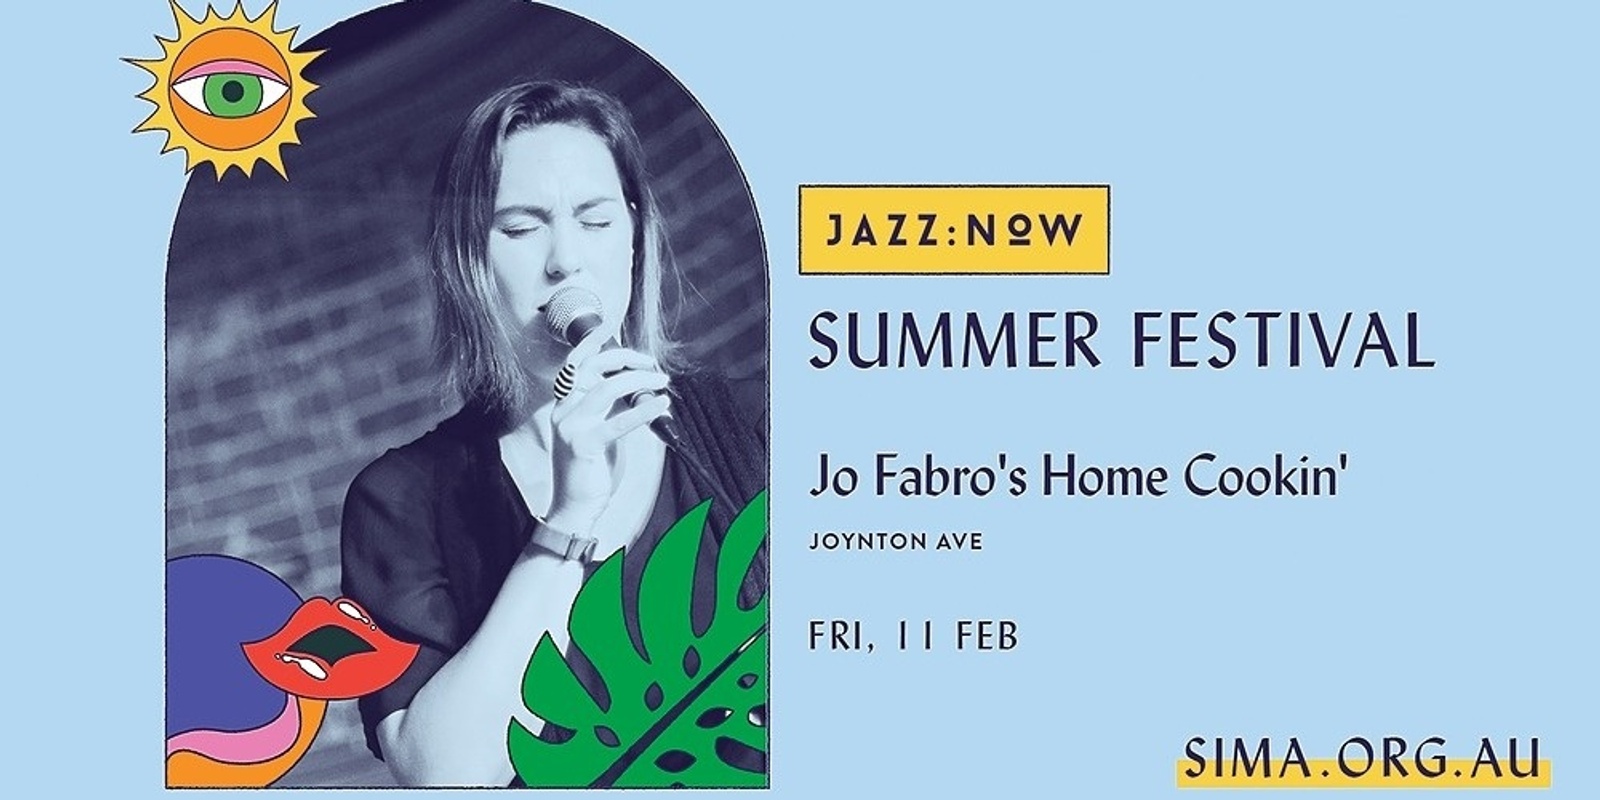 Banner image for Jo Fabro's Home Cookin' - Jazz:NOW Summer Festival